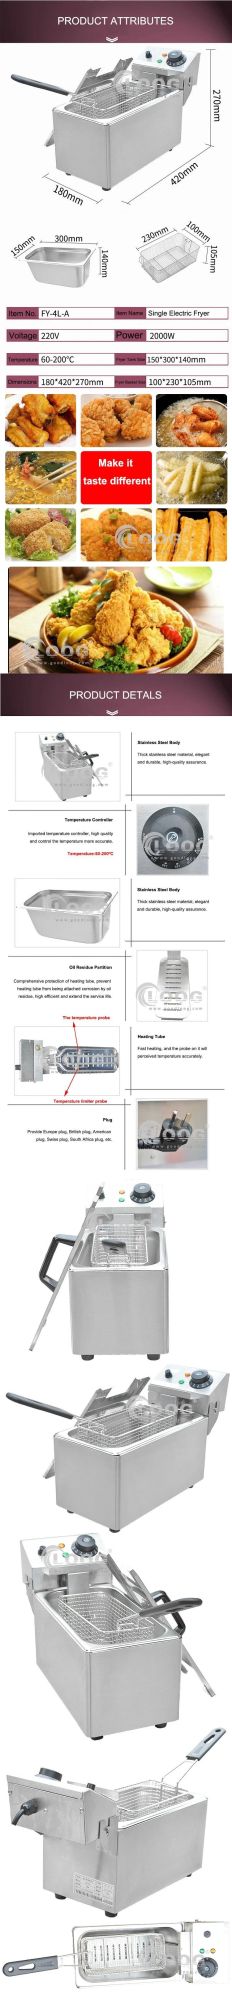 Commercial Counter Top Automatic French Chips Frying Machine Commerical Fryer for Fast Food Restaurant Equipment